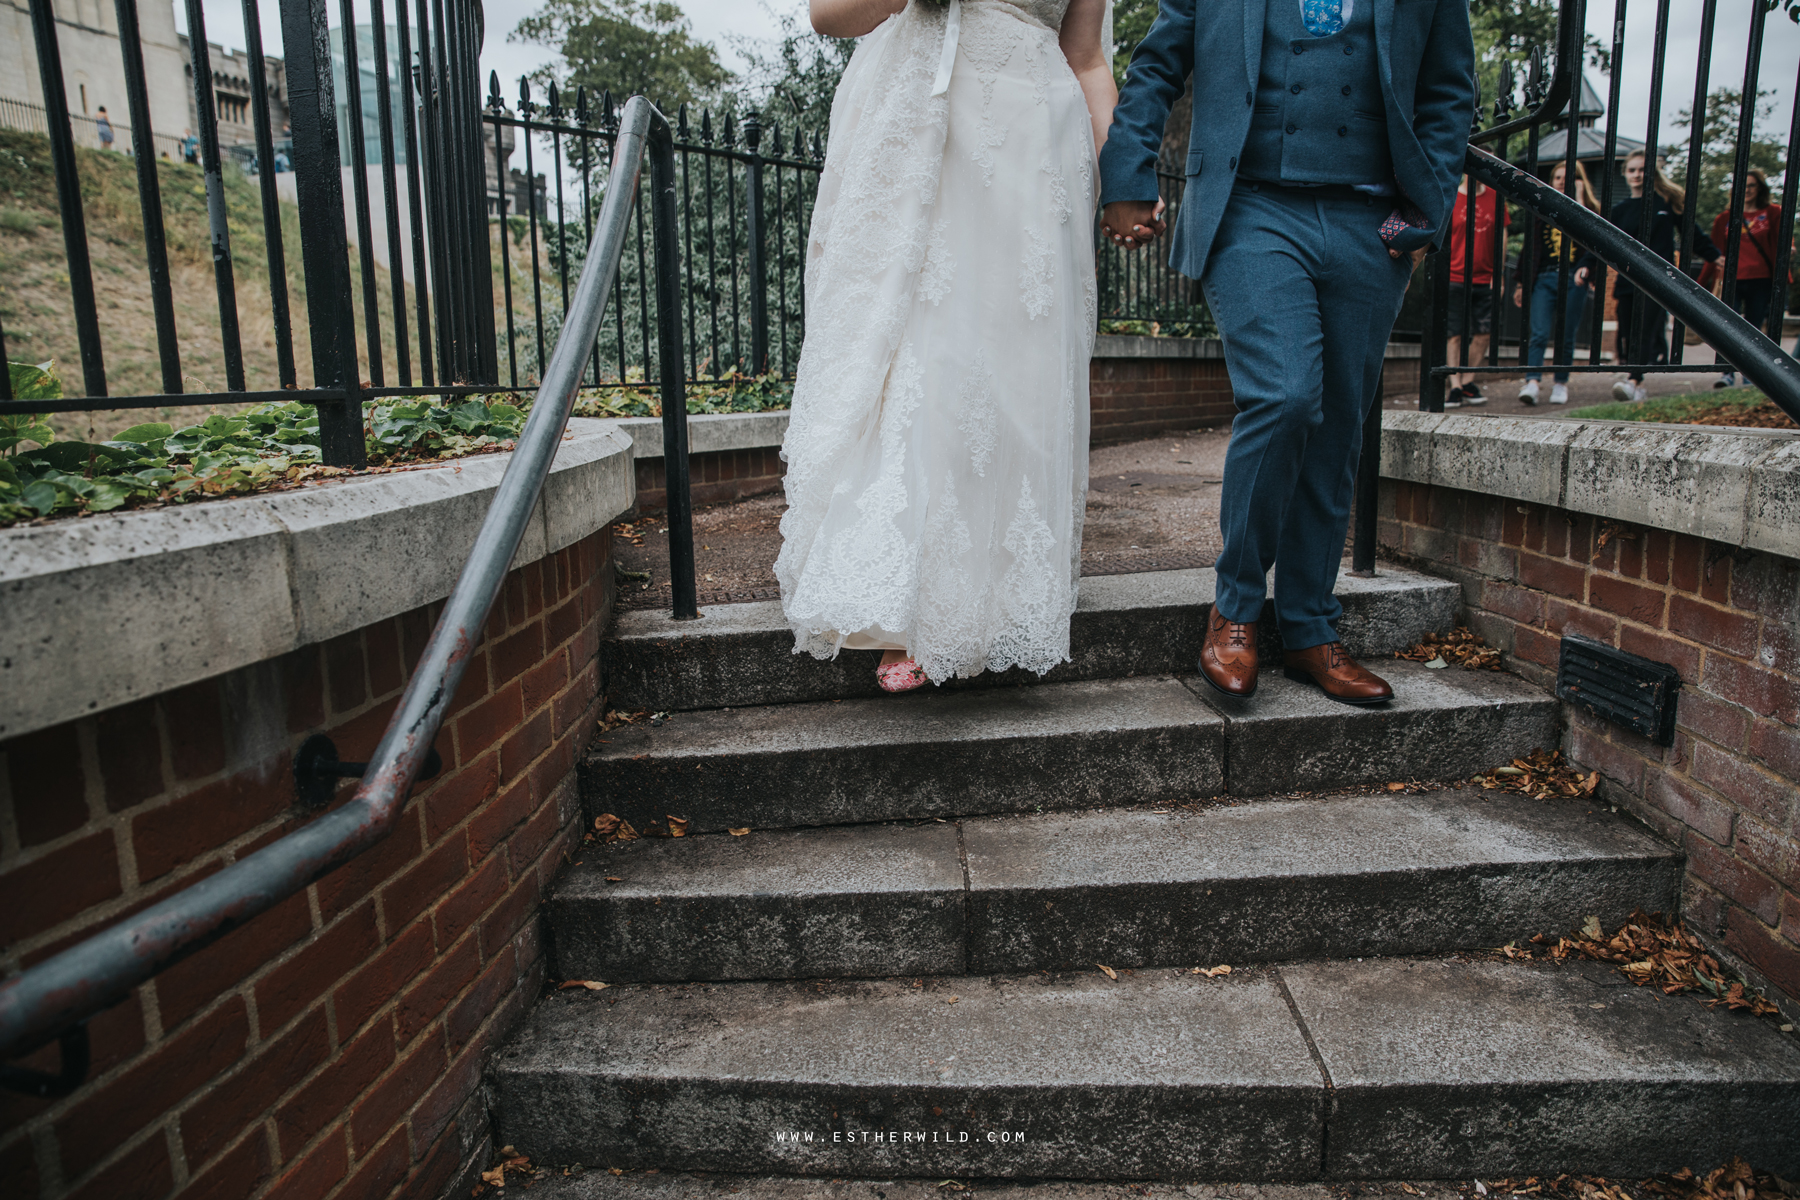 Norwich_Castle_Arcade_Grosvenor_Chip_Birdcage_Cathedral_Cloisters_Refectory_Wedding_Photography_Esther_Wild_Photographer_Norfolk_Kings_Lynn_3R8A1226.jpg